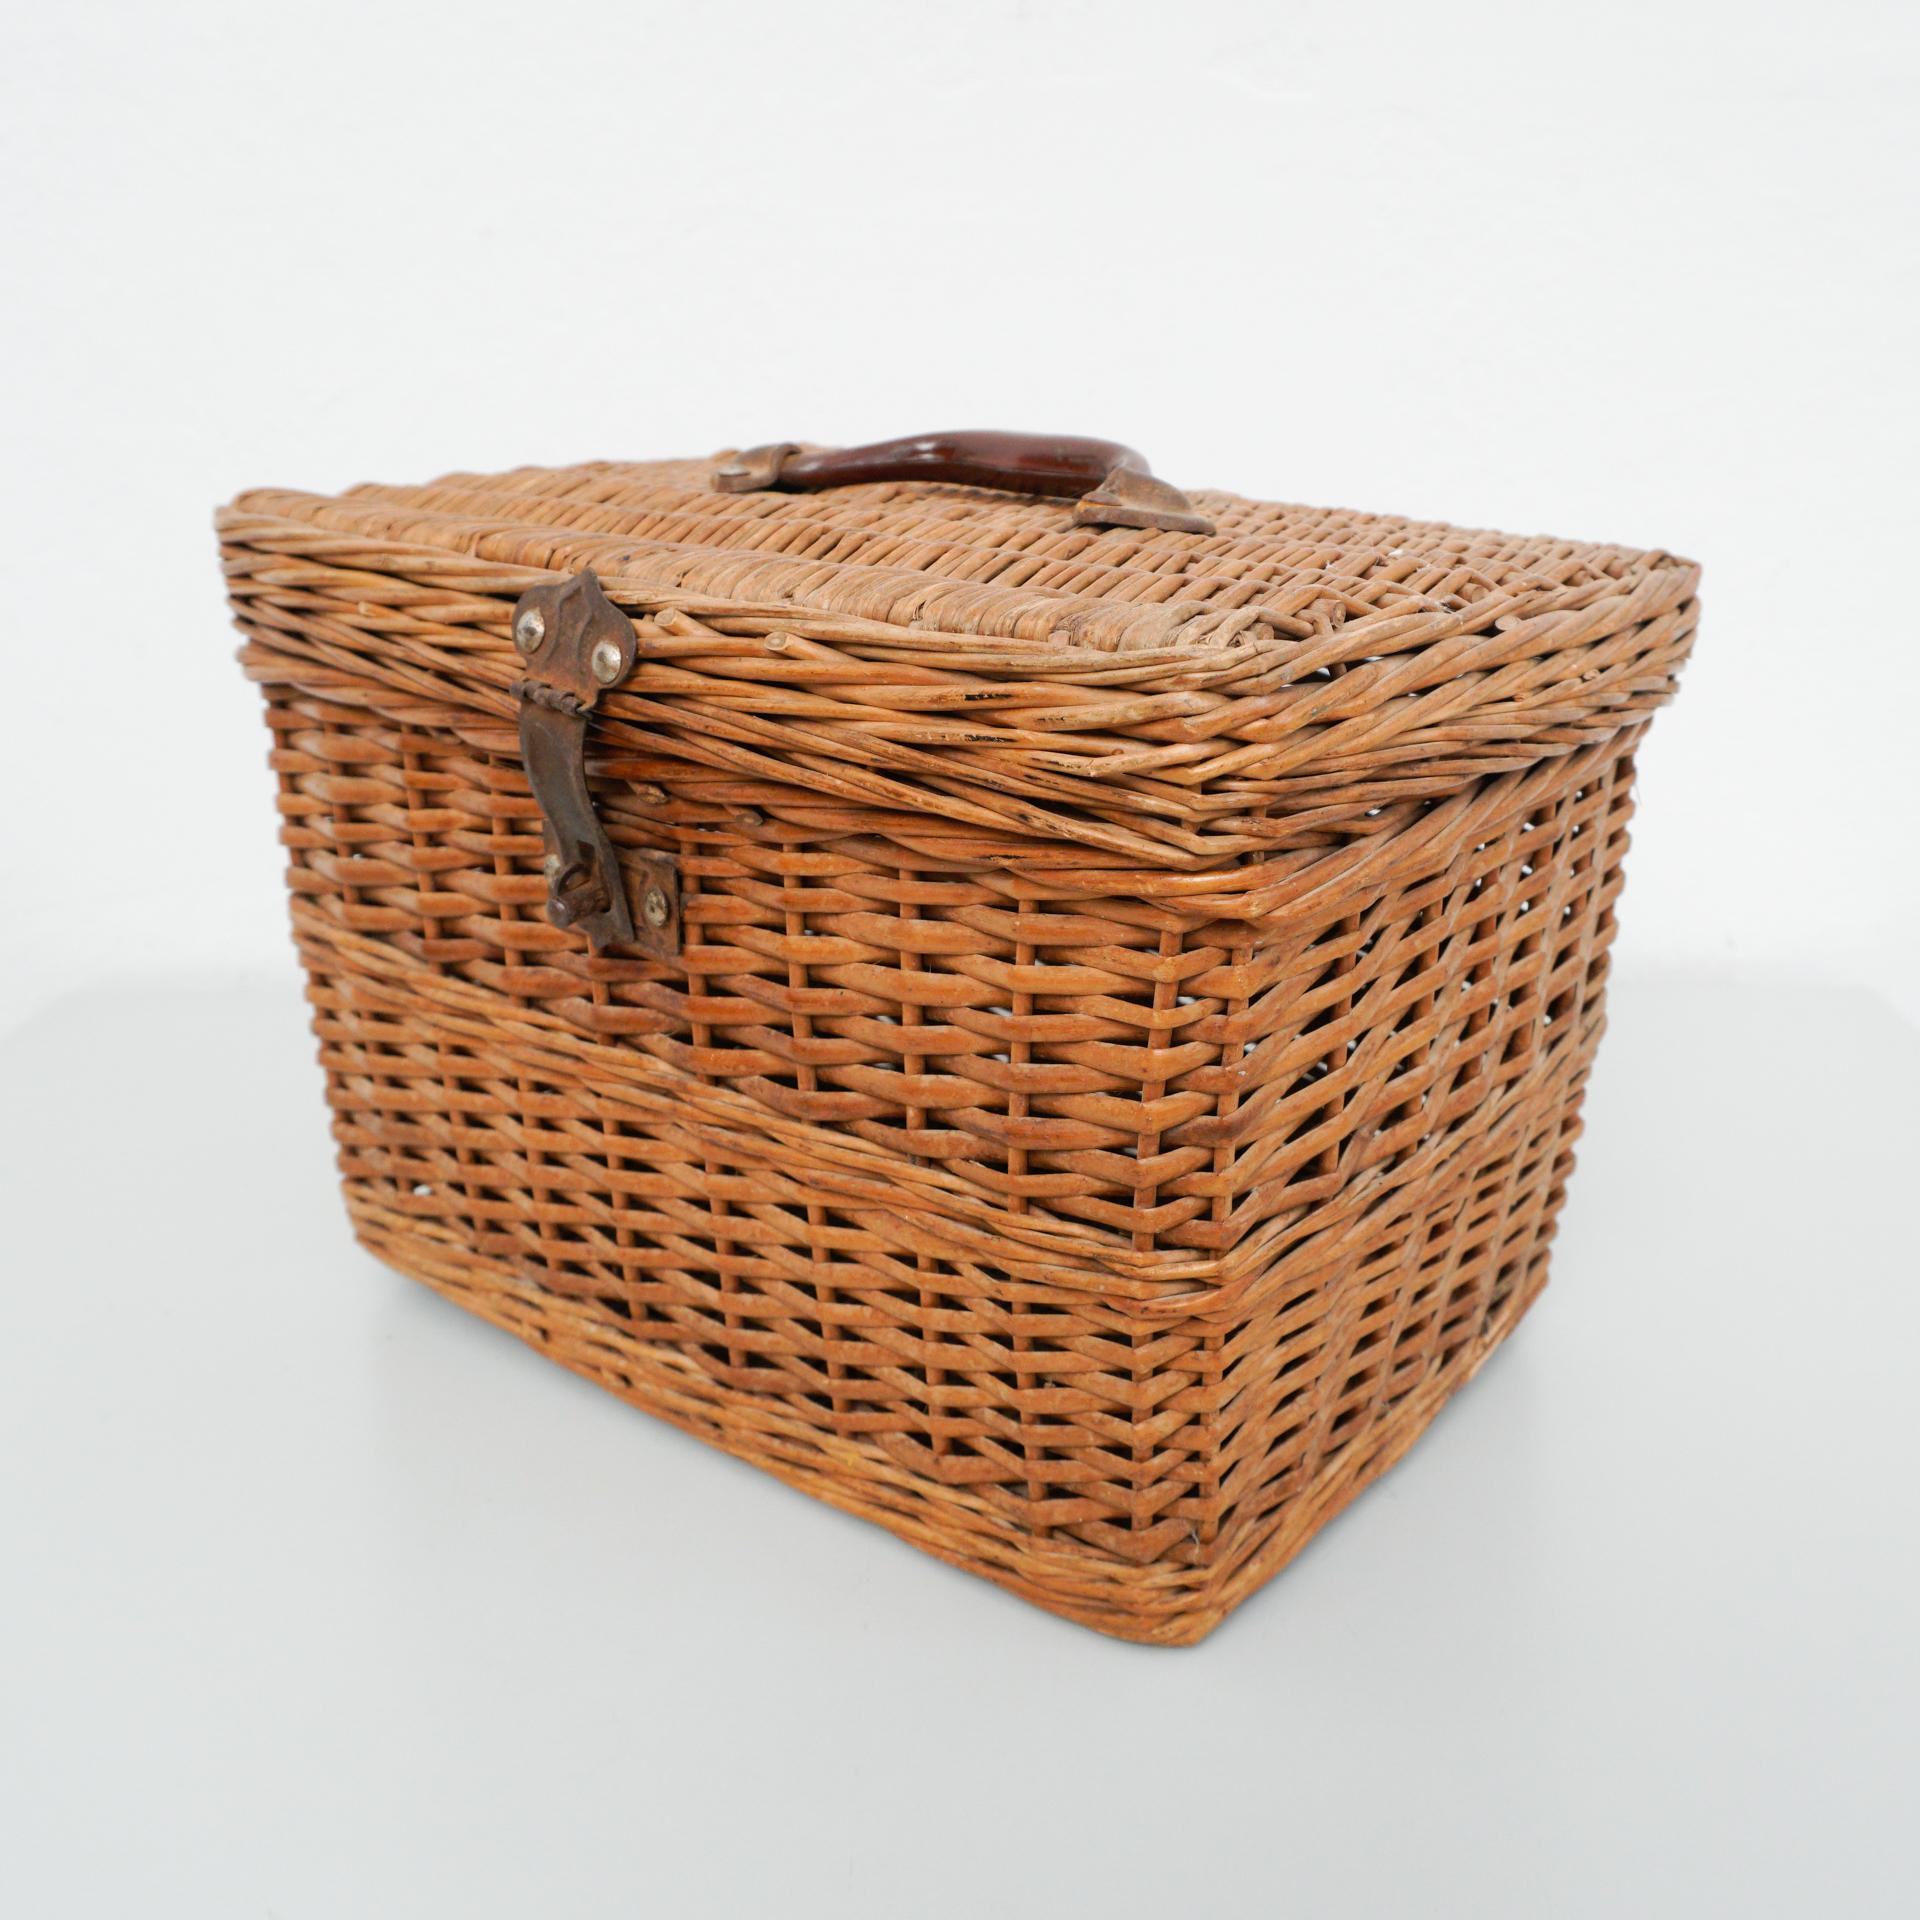 Traditional rustic rattan basket, circa 1950
By unknown Manufacturer. France

In original condition with minor wear consistent of age and use, preserving a beautiful patina.